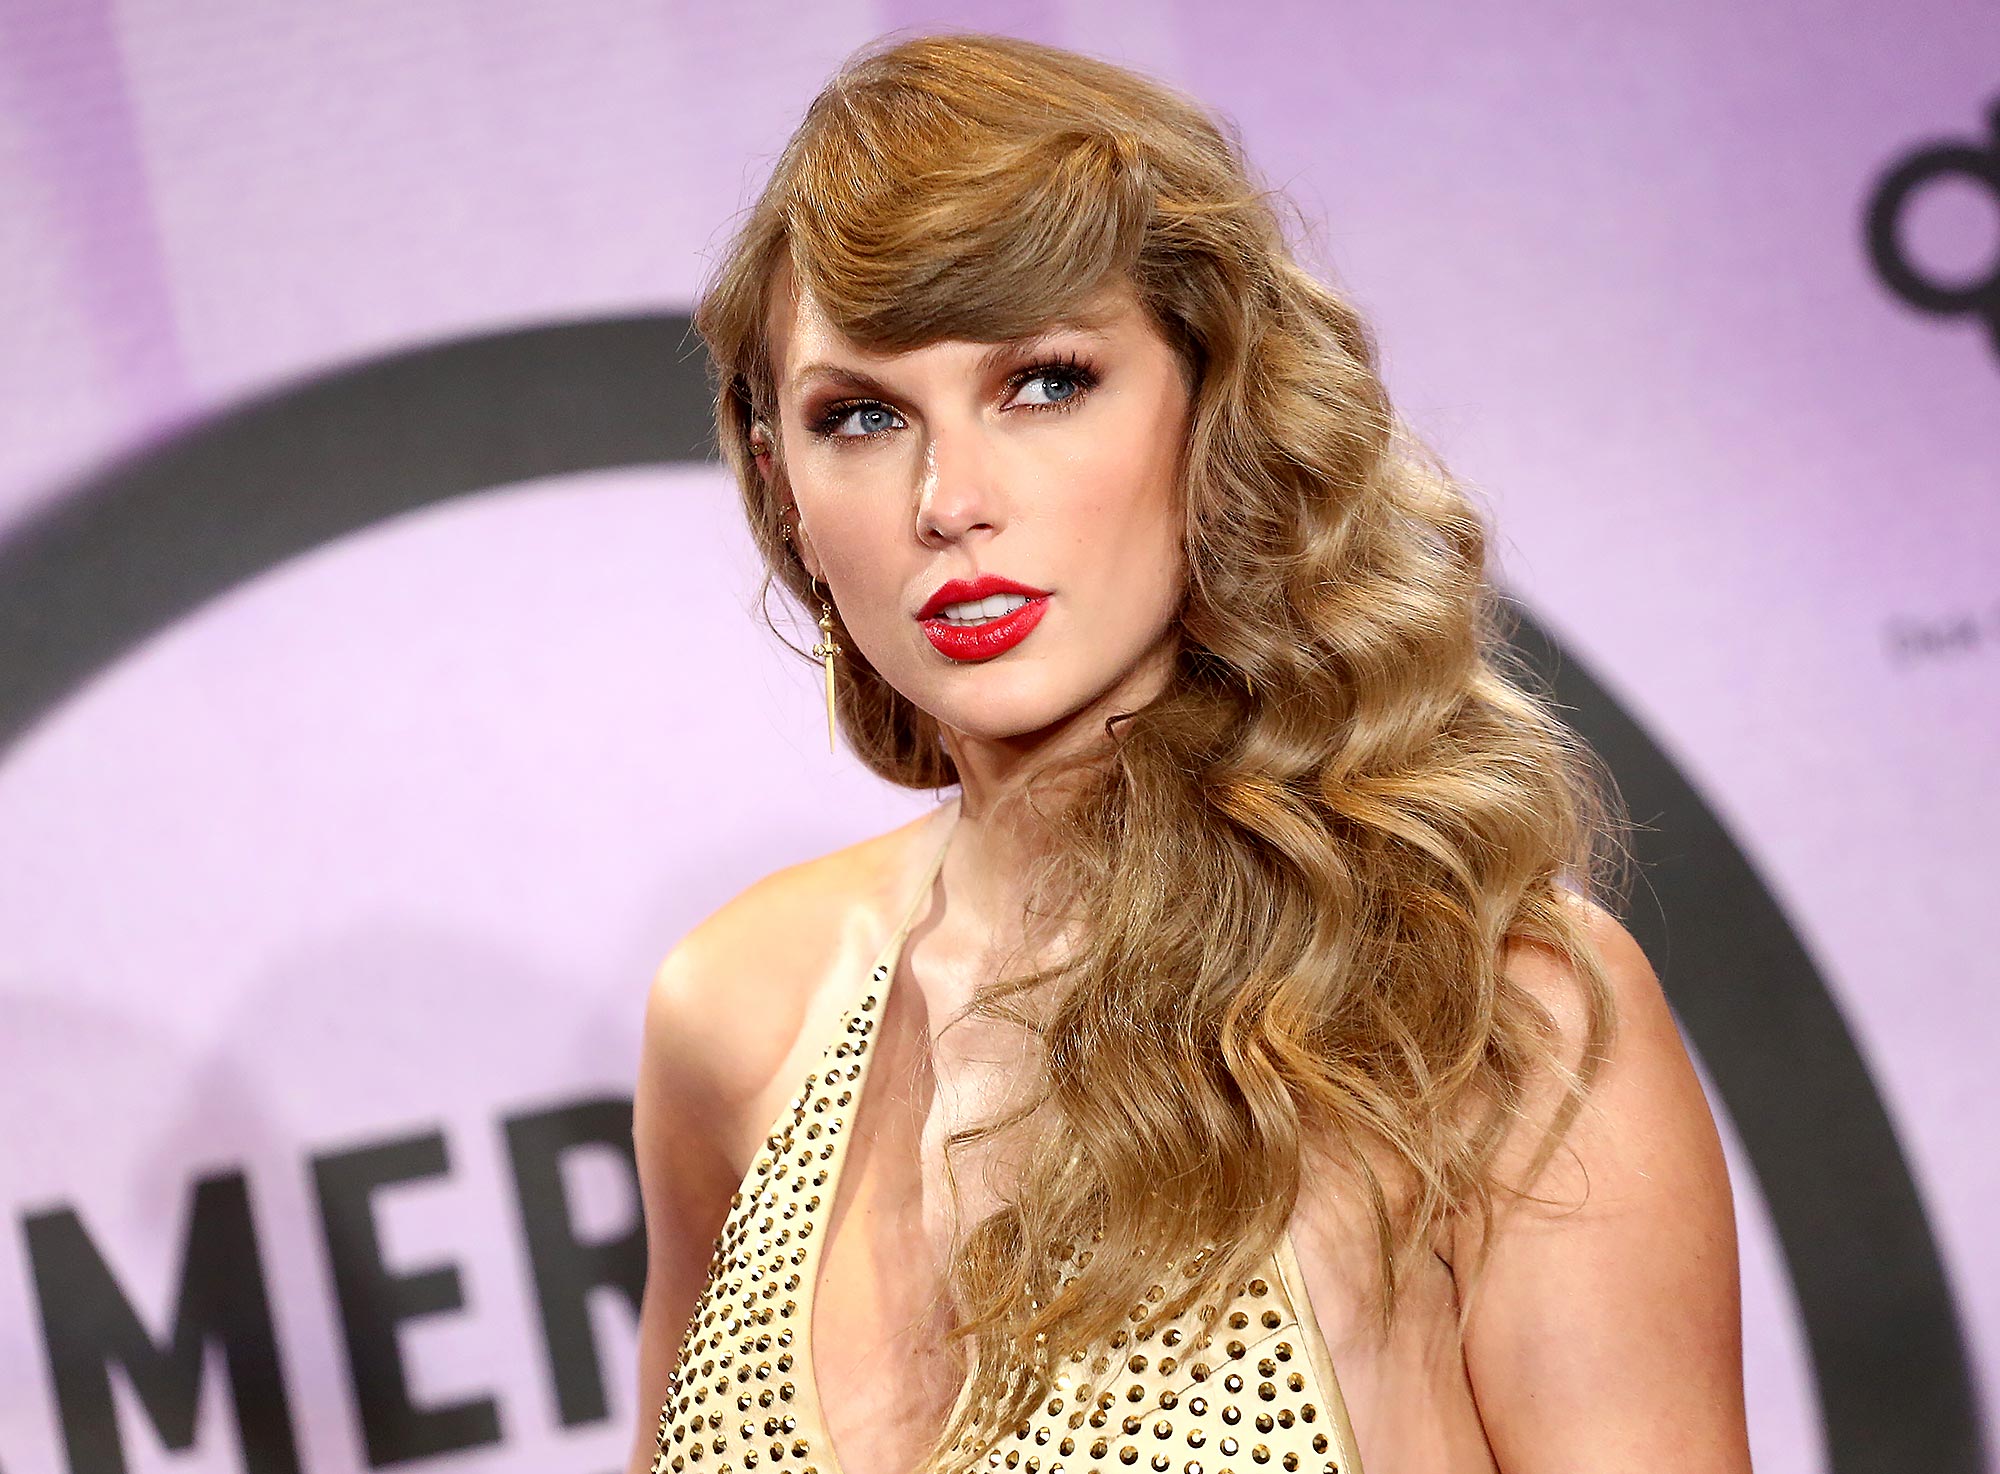 Philippines filling Taylor Swift void with Taylor Sheesh : NPR